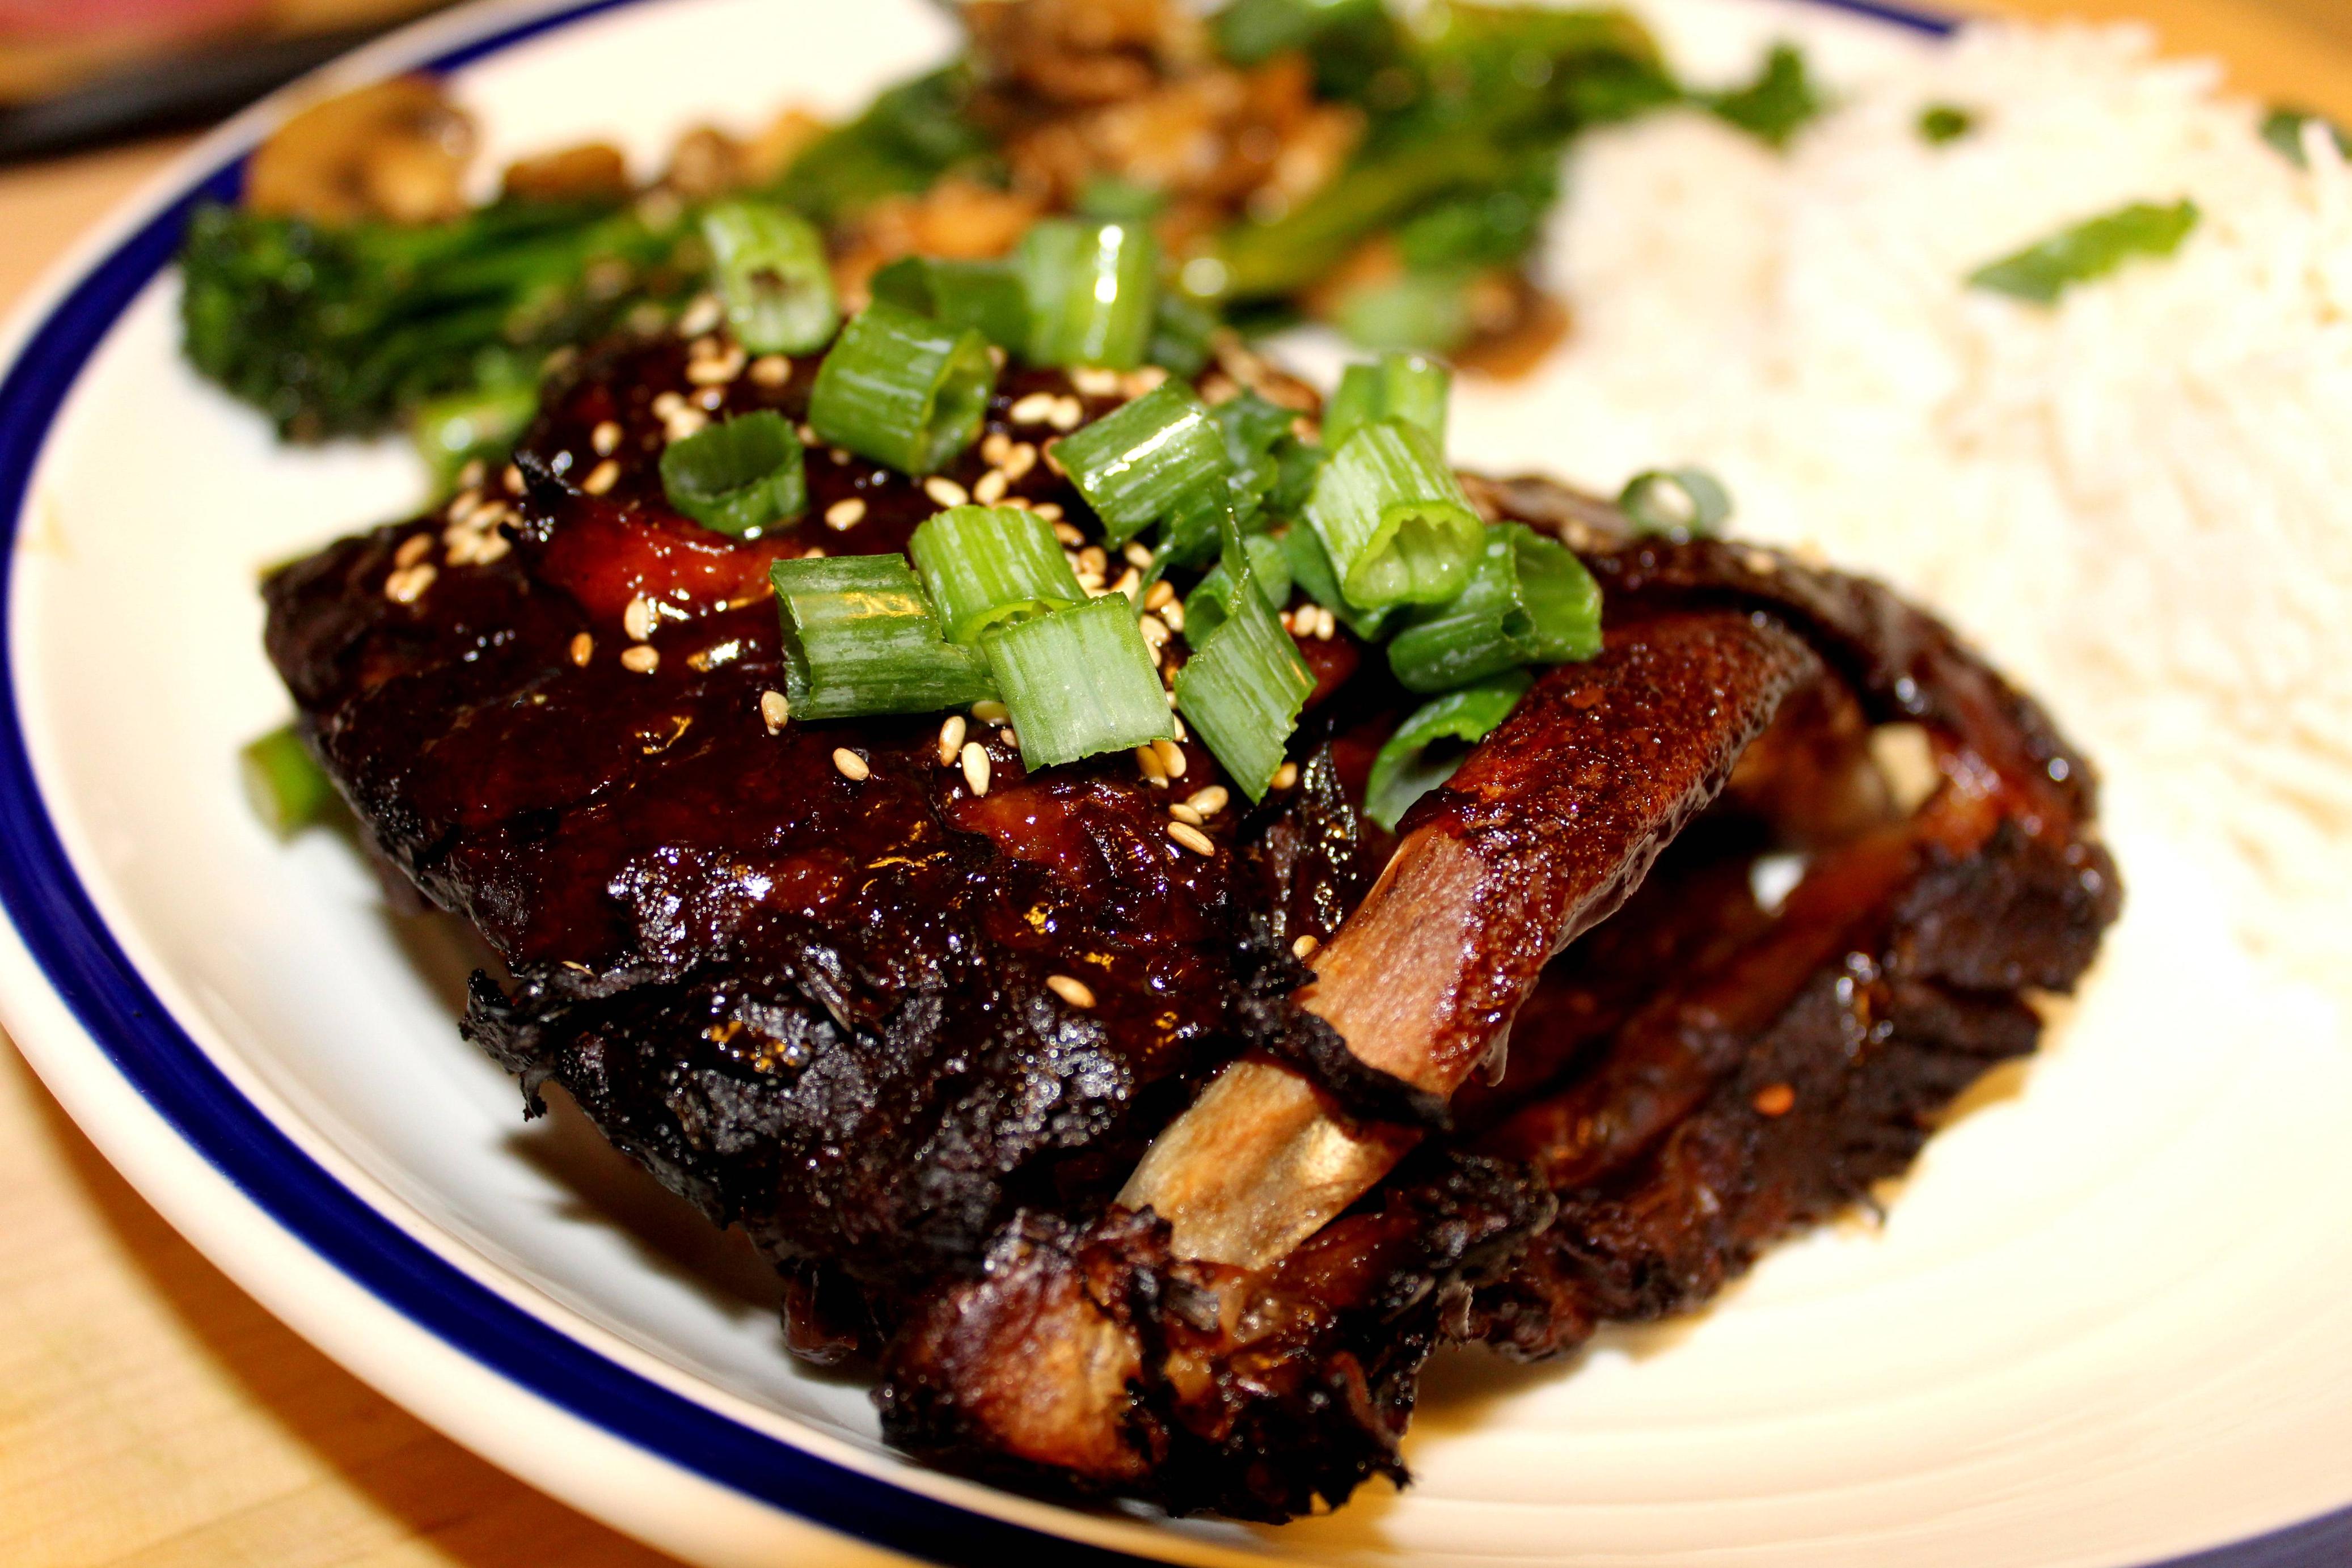 Electric B. recomended crockpot Asian ribs